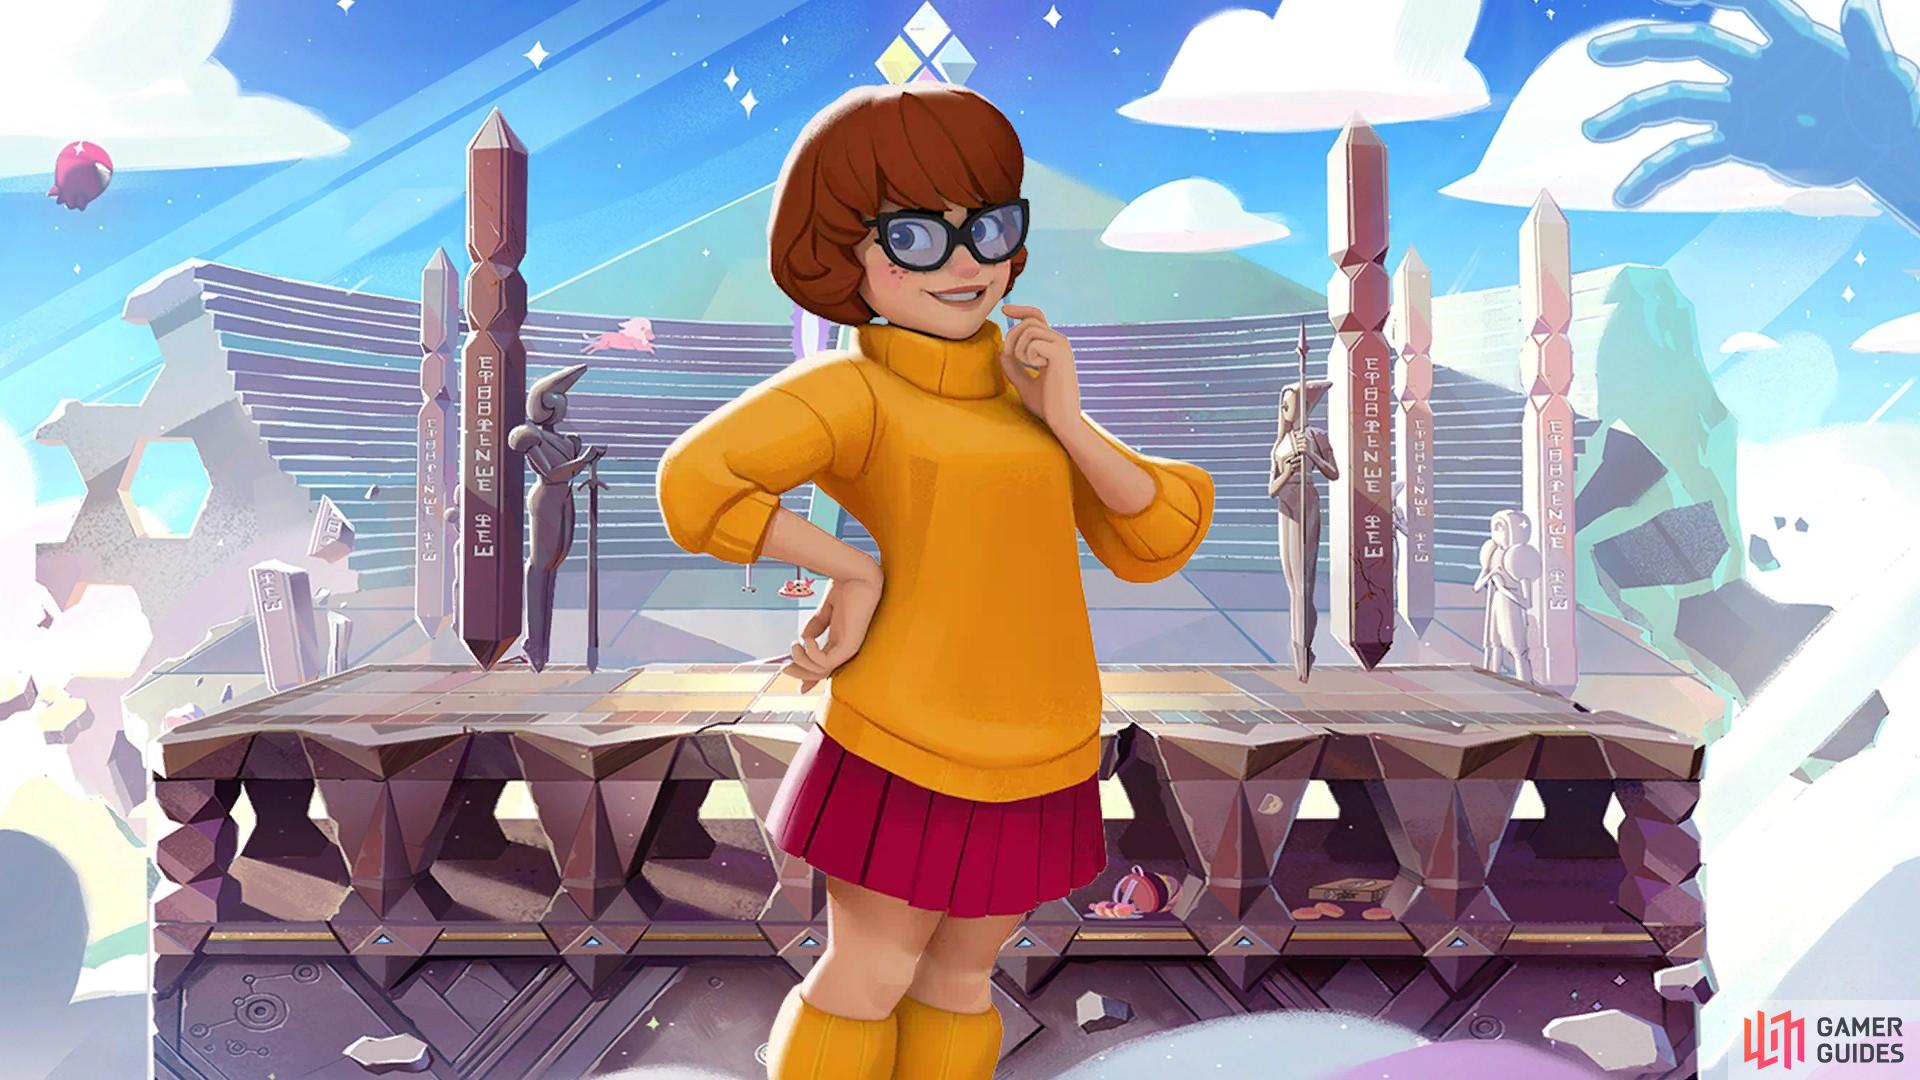 Here are some useful combos to use for Velma in MultiVersus.